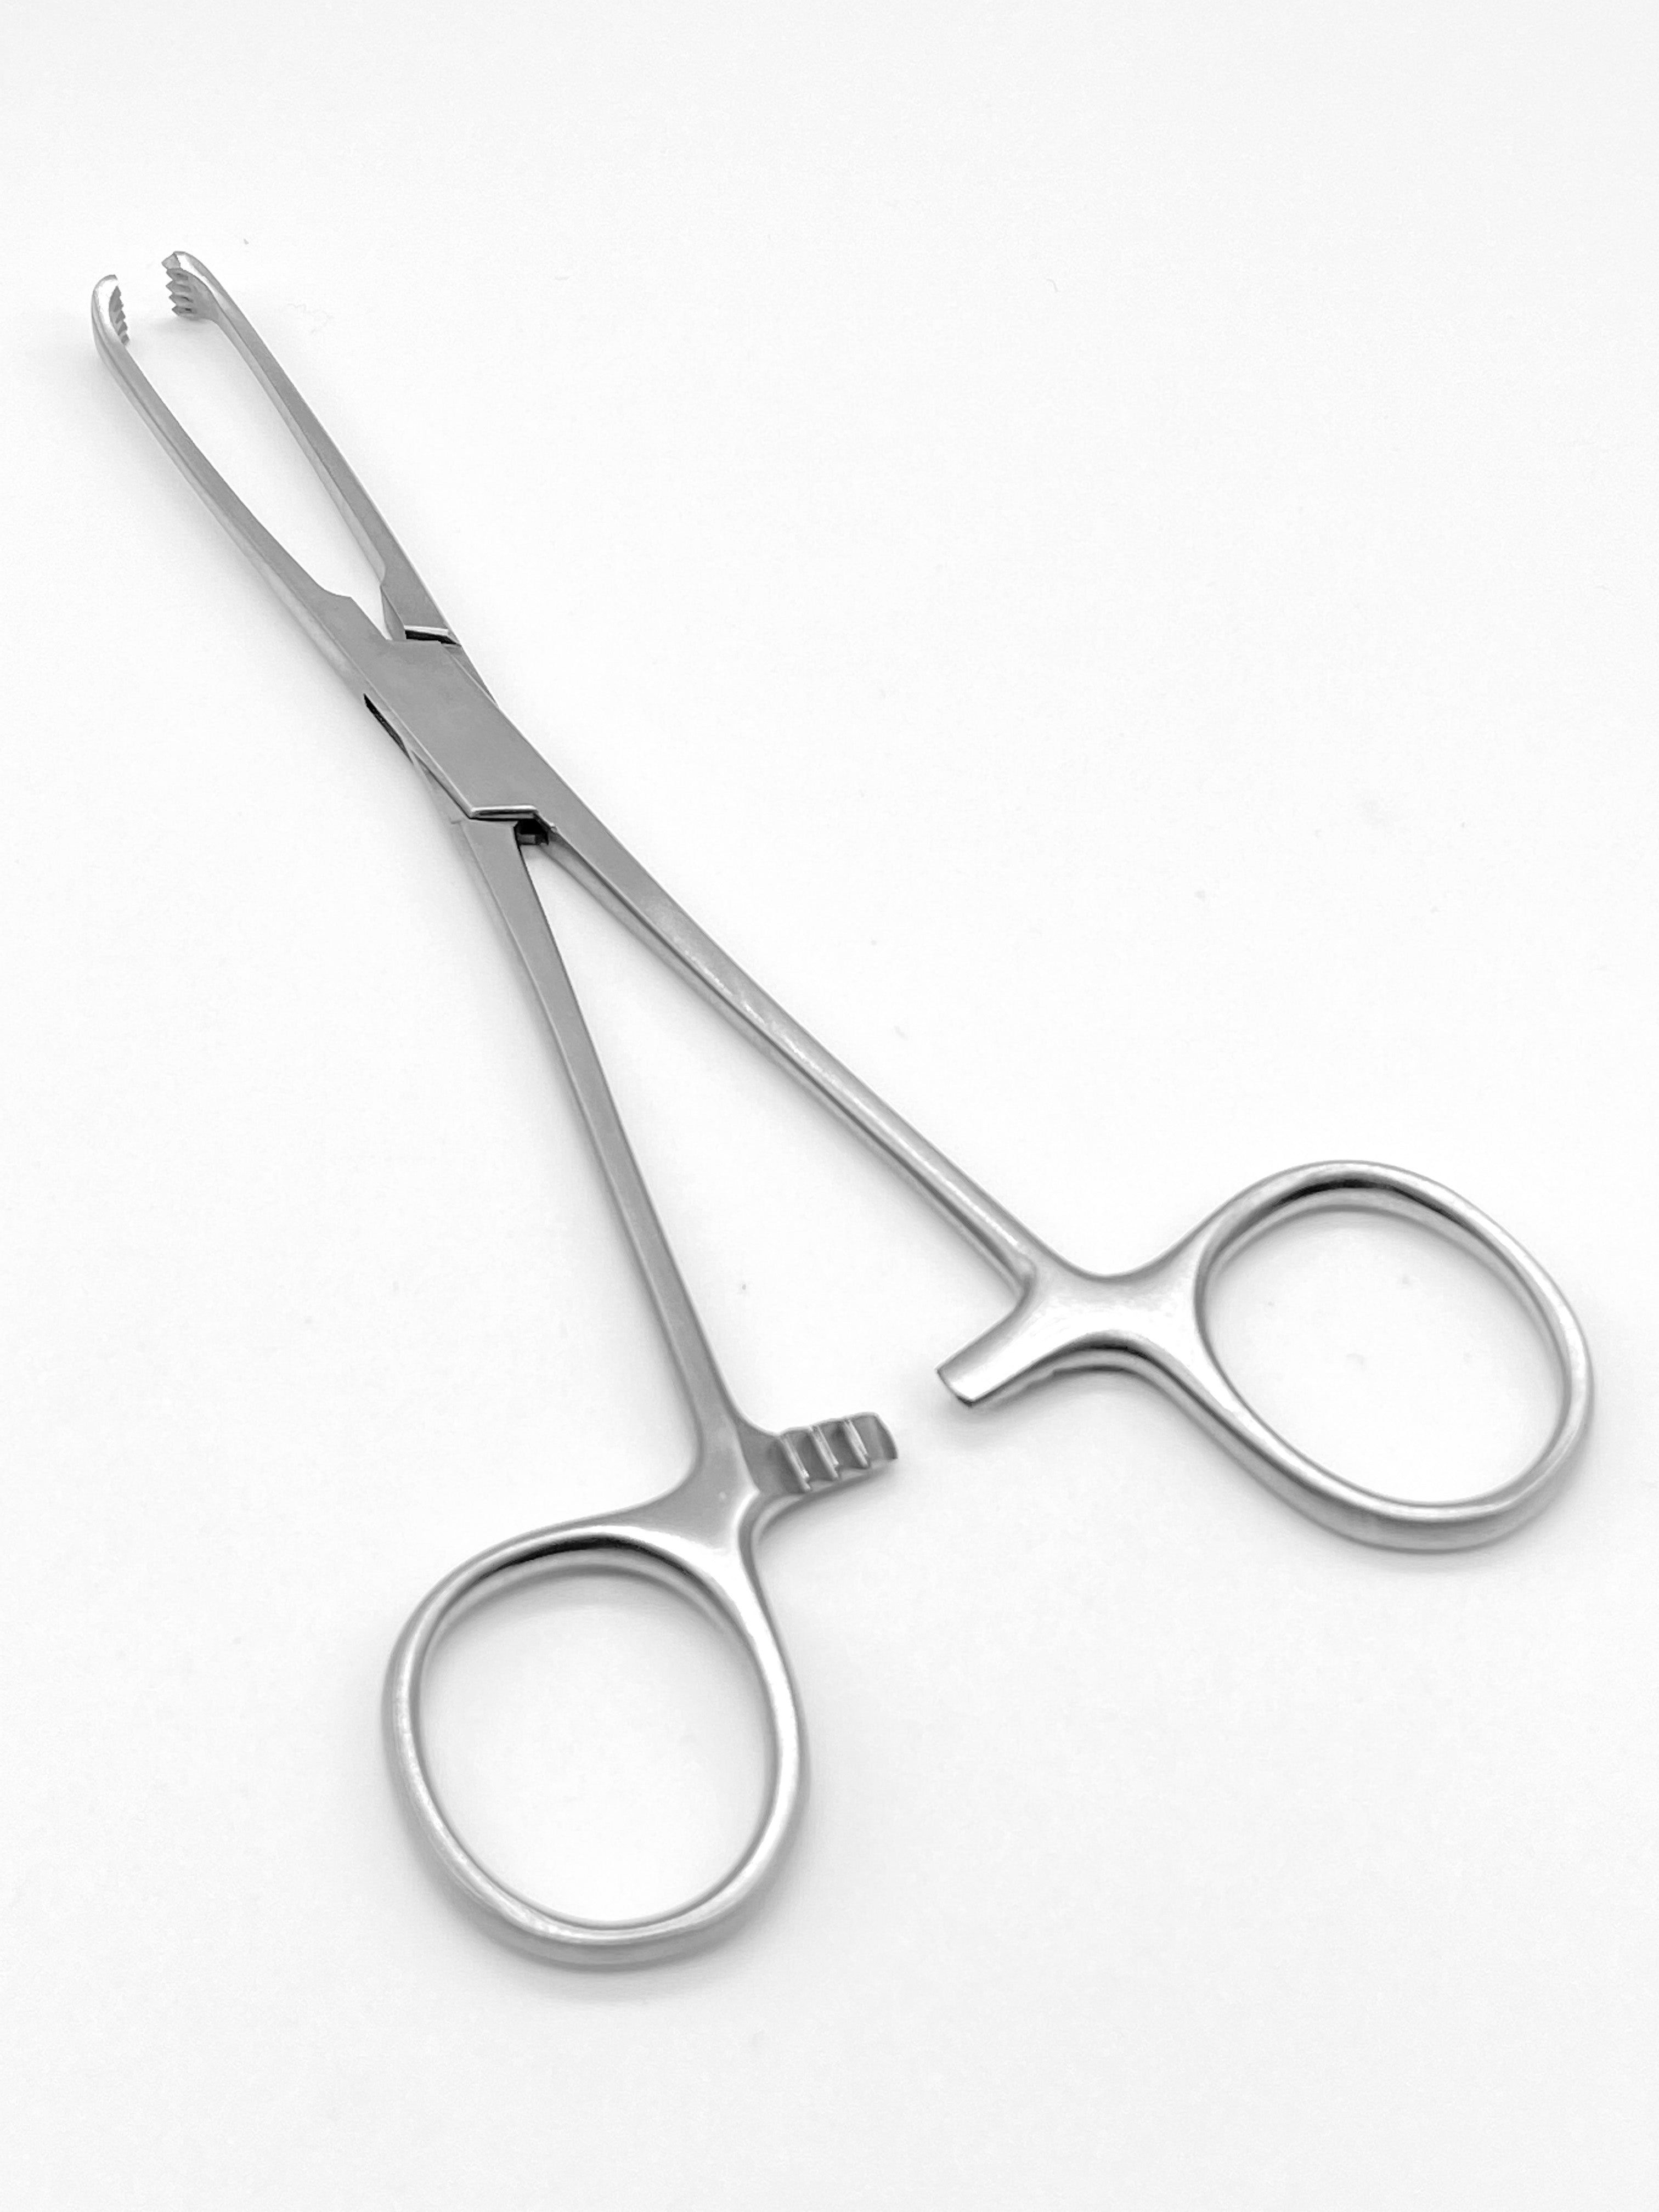 Artery Forceps - Allis Tissue Forceps - Surgical Podiatry Instruments